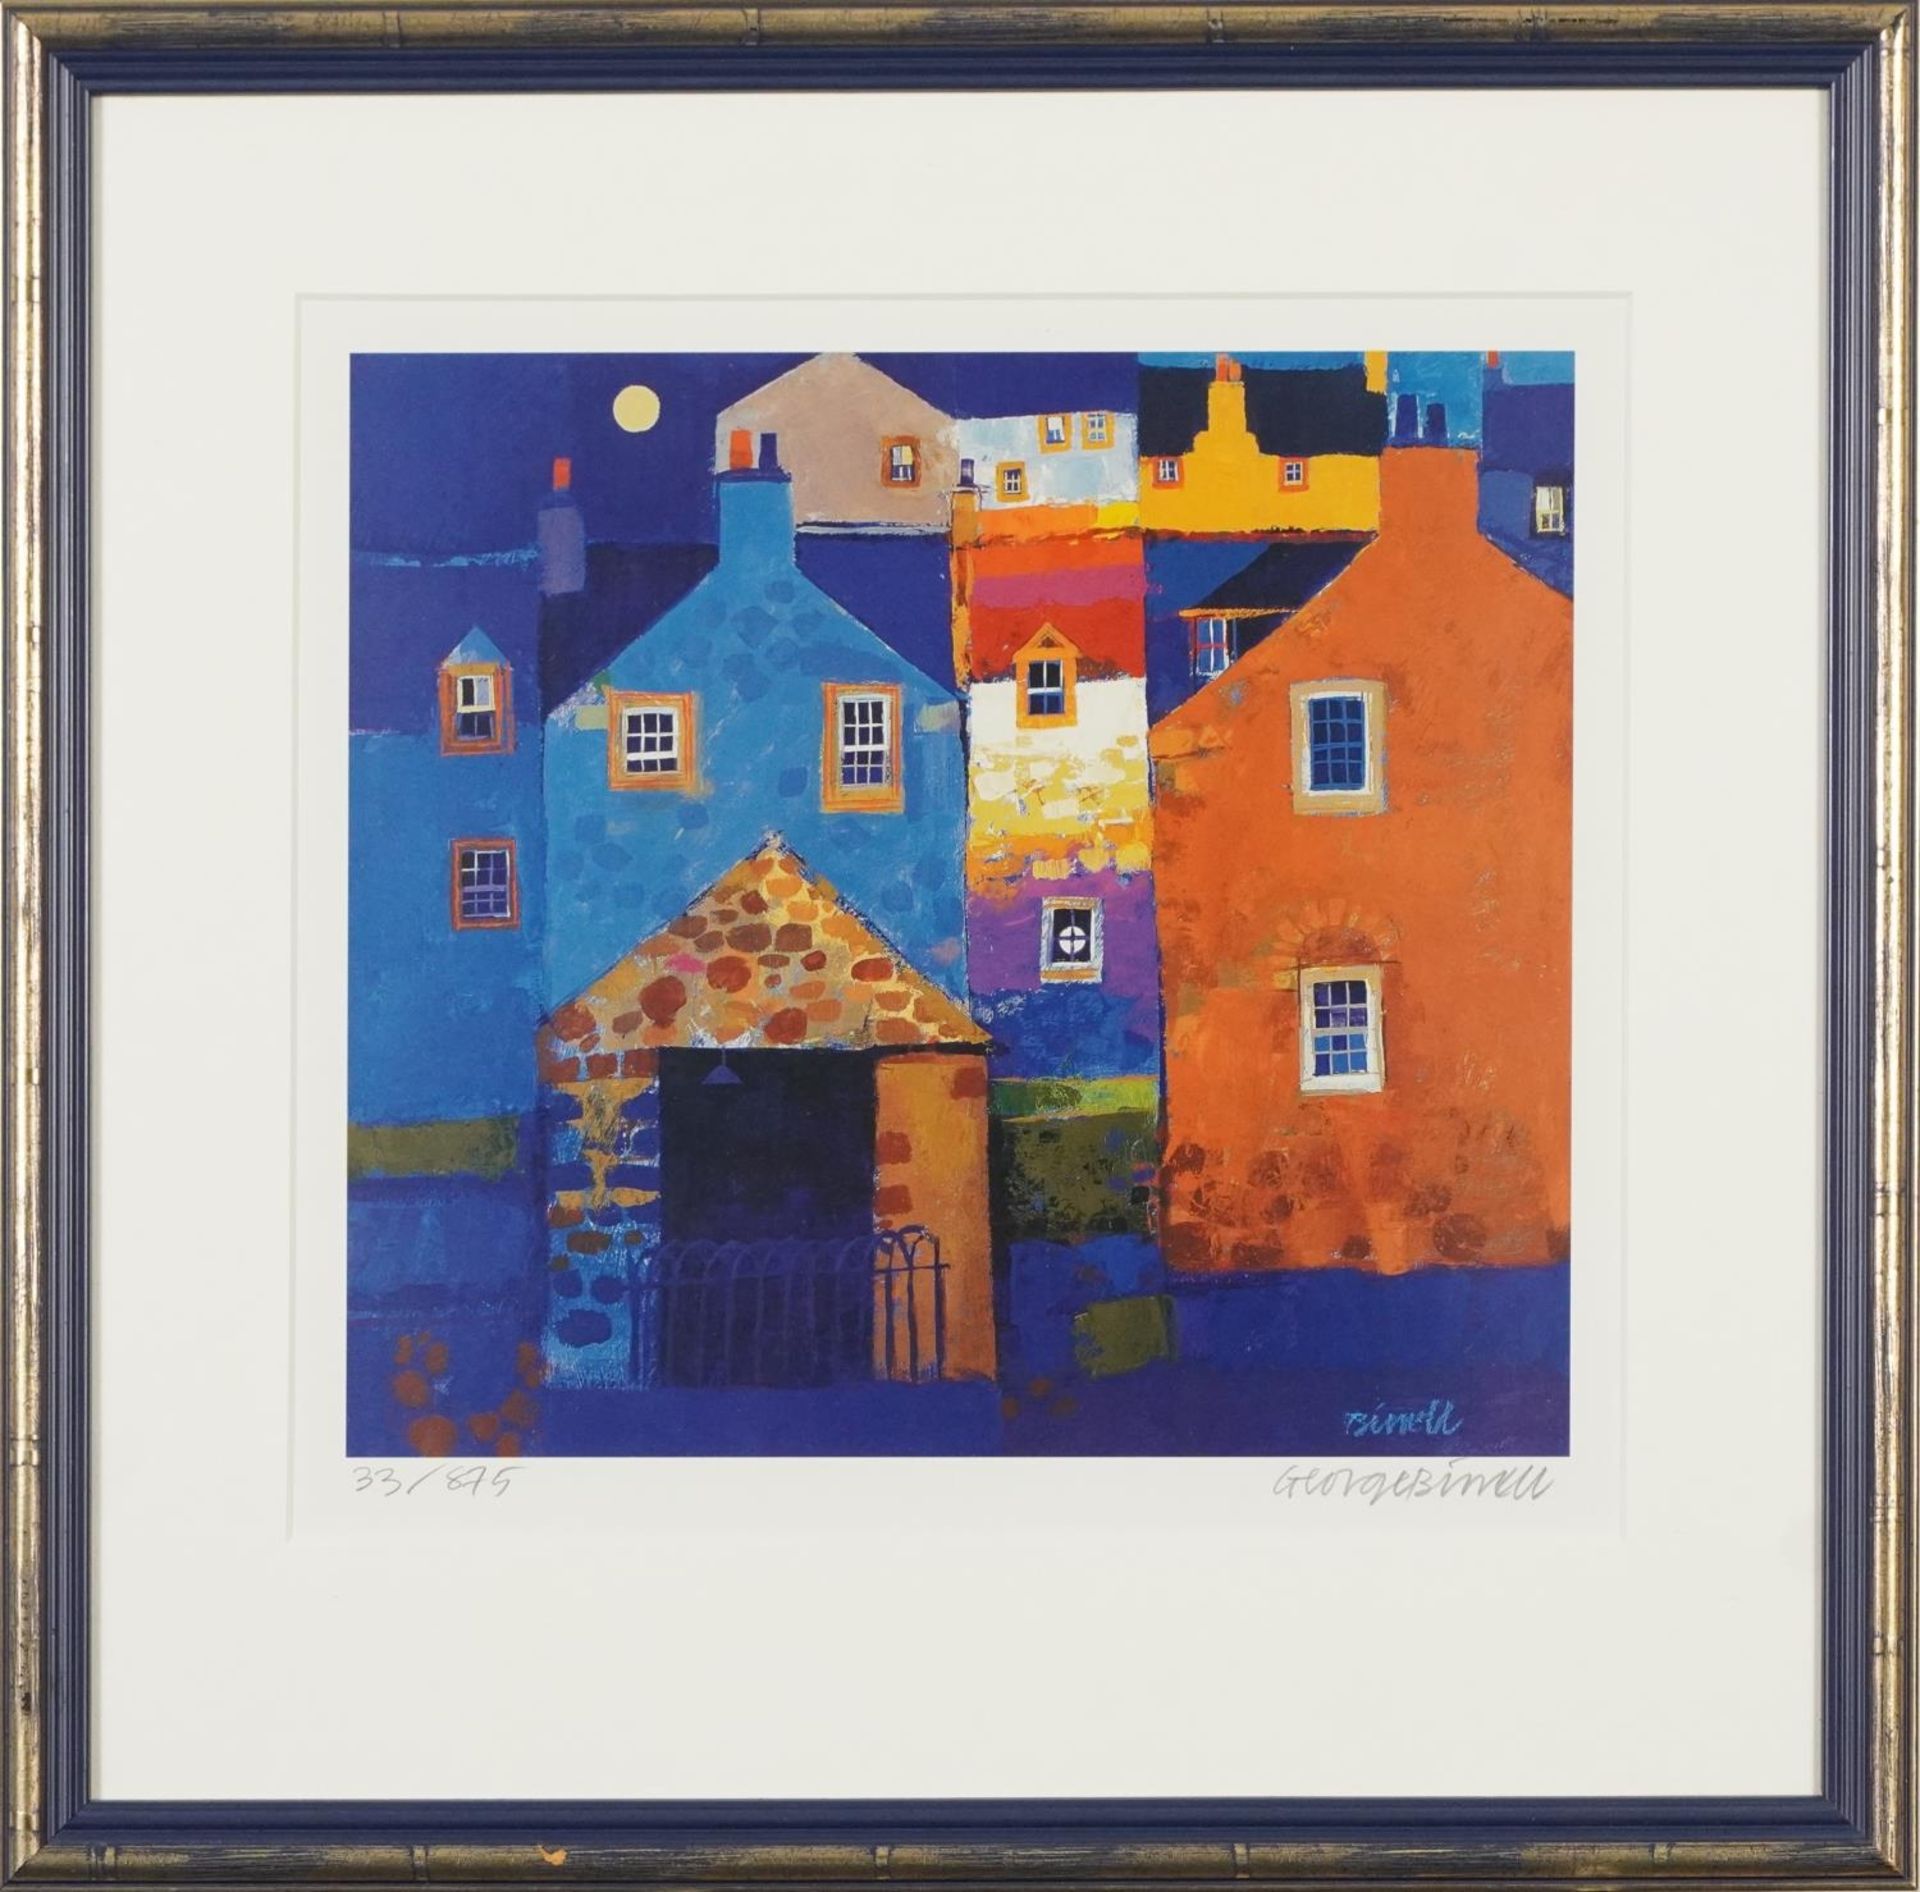 George Birrell - Stone shed, pencil signed offset lithograph in colour, limited edition 33/875 - Image 2 of 6